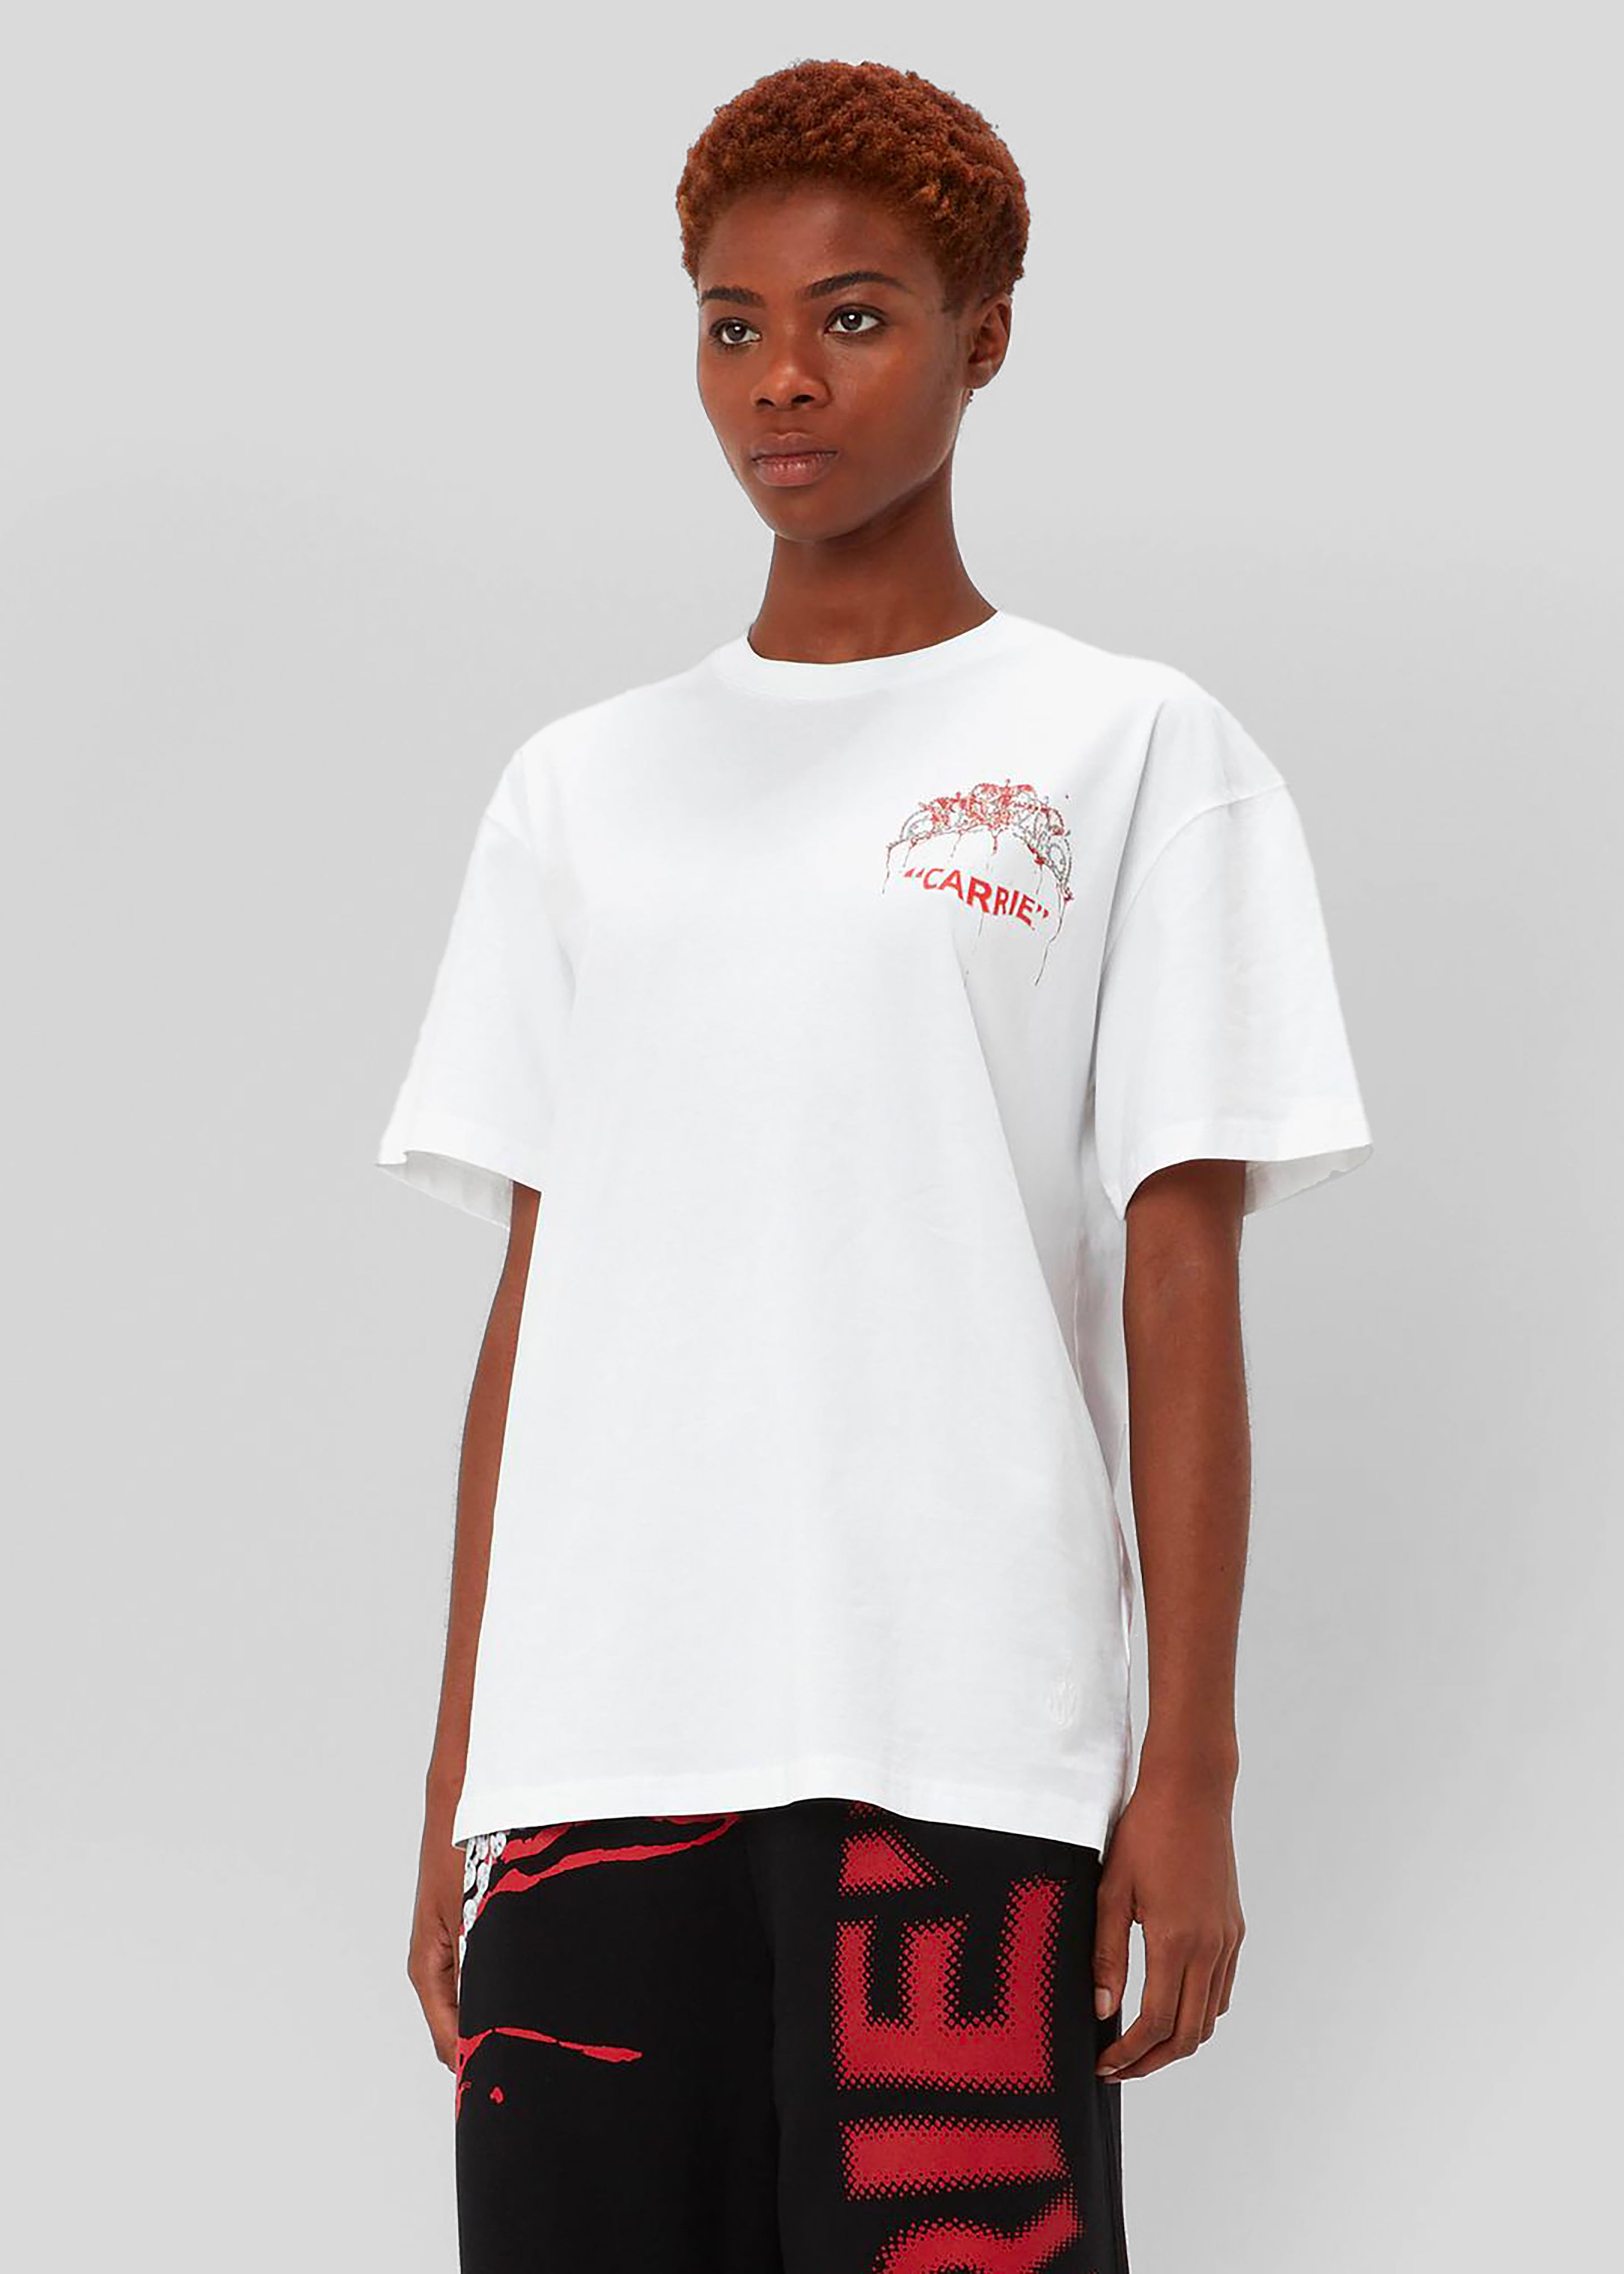 JW Anderson Carrie Tiara Chest Embroidery T-Shirt - White - 2